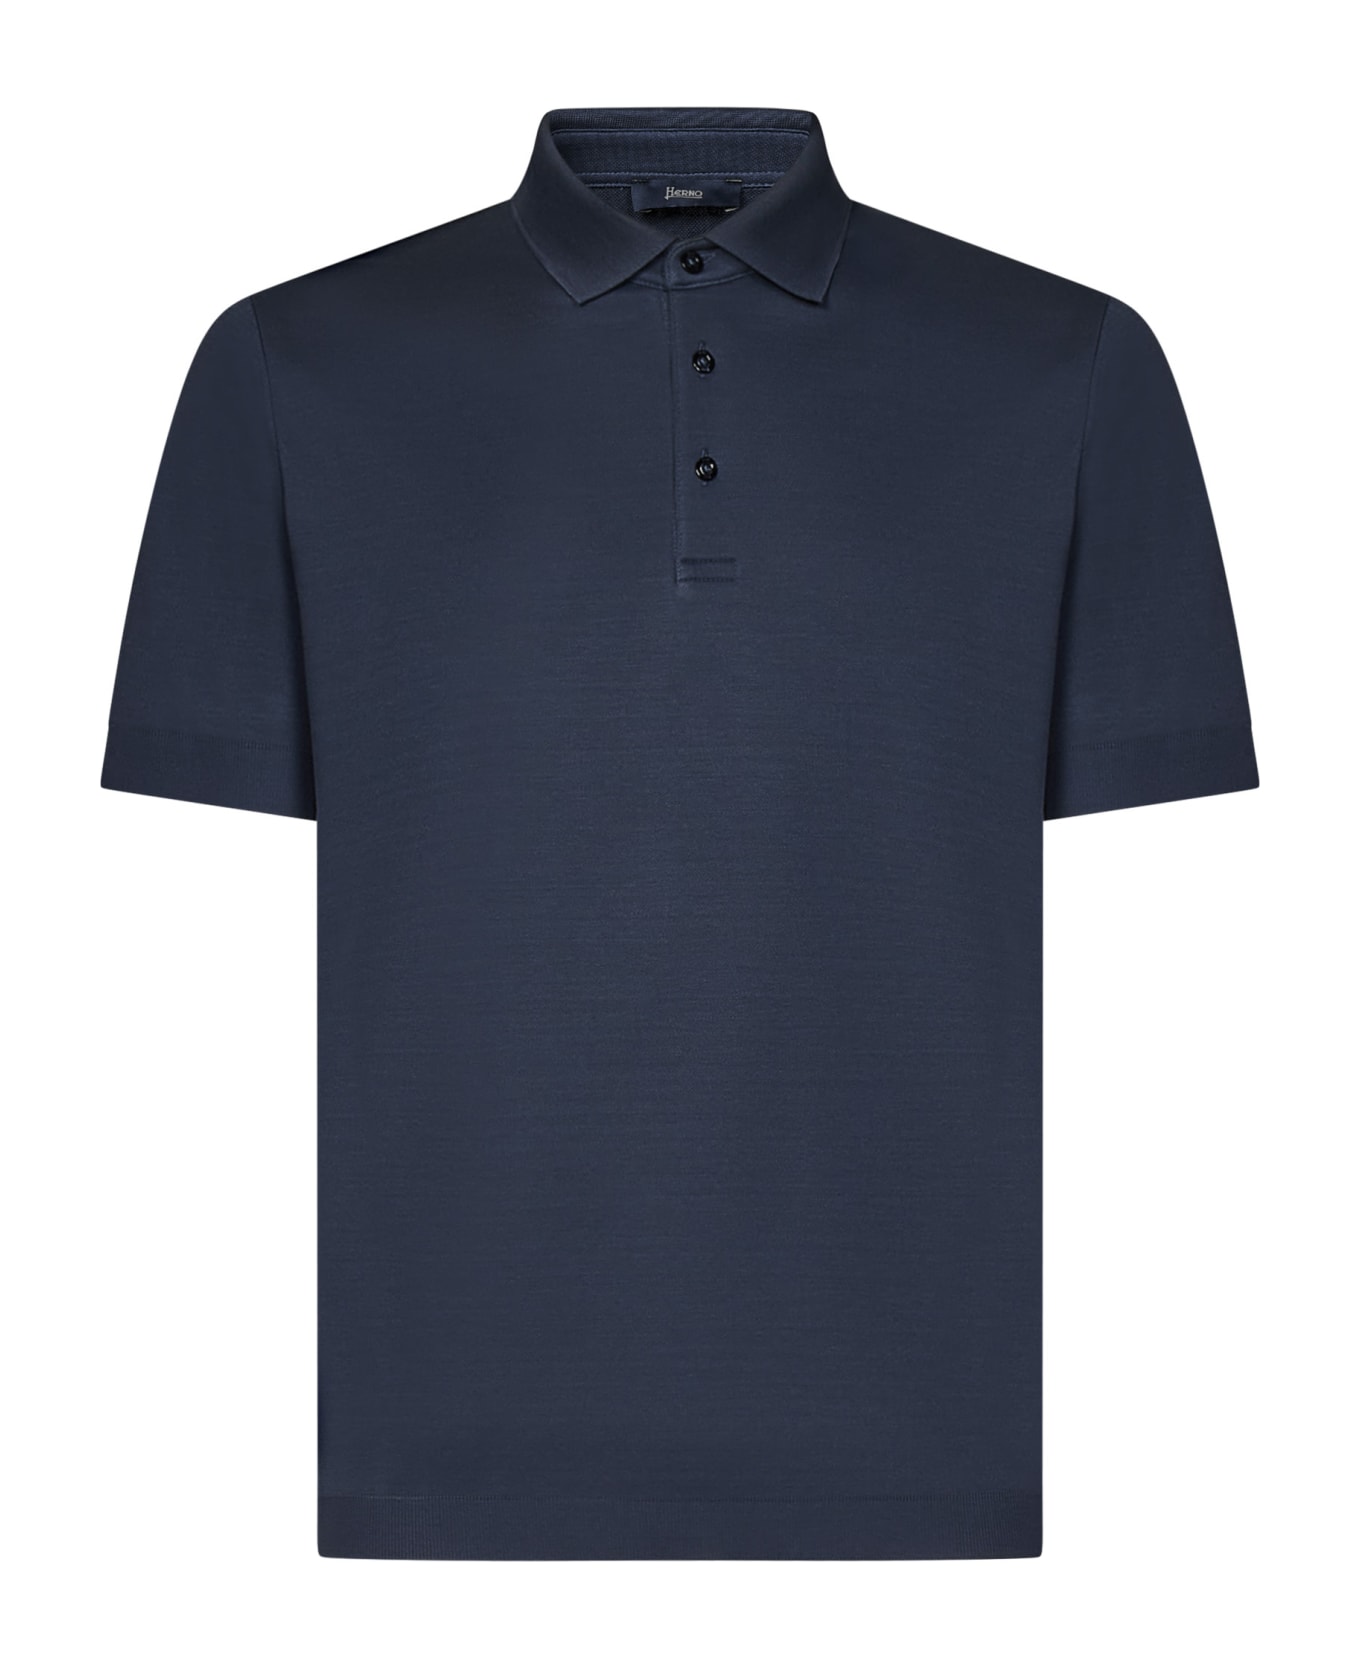 Herno Polo Shirt - Blue ポロシャツ